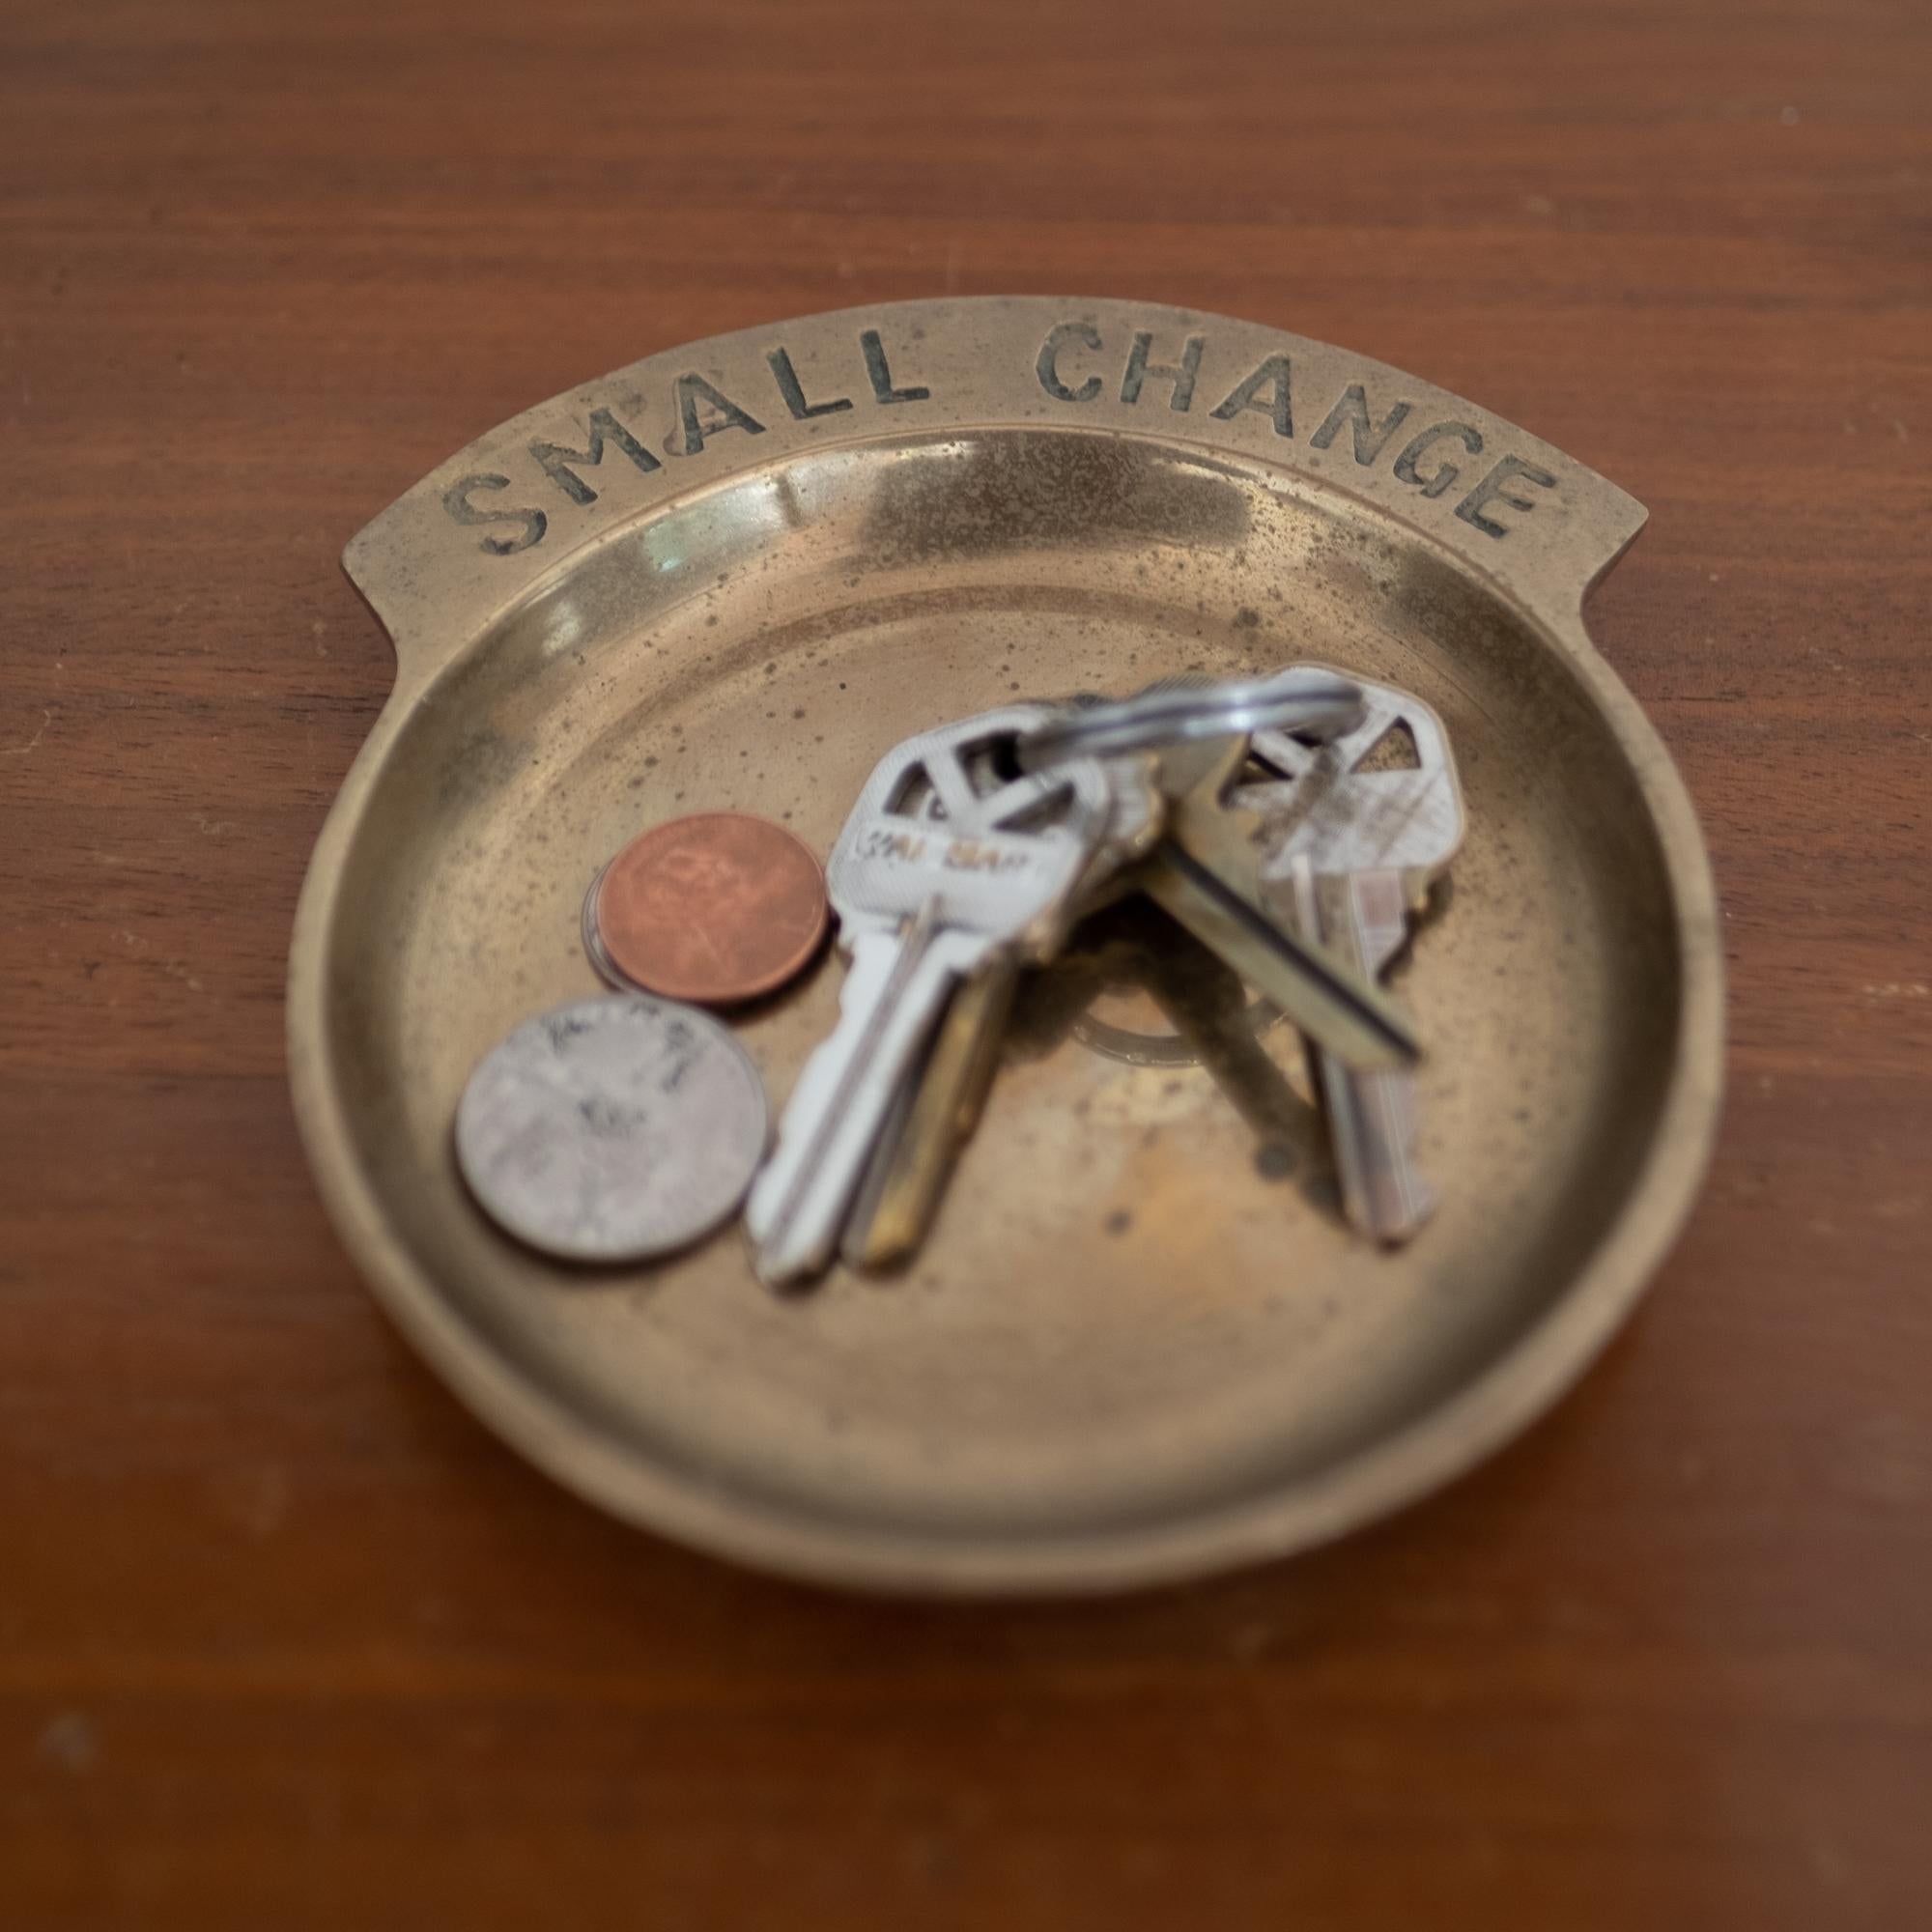 Solid brass small change catch all, 1970s.